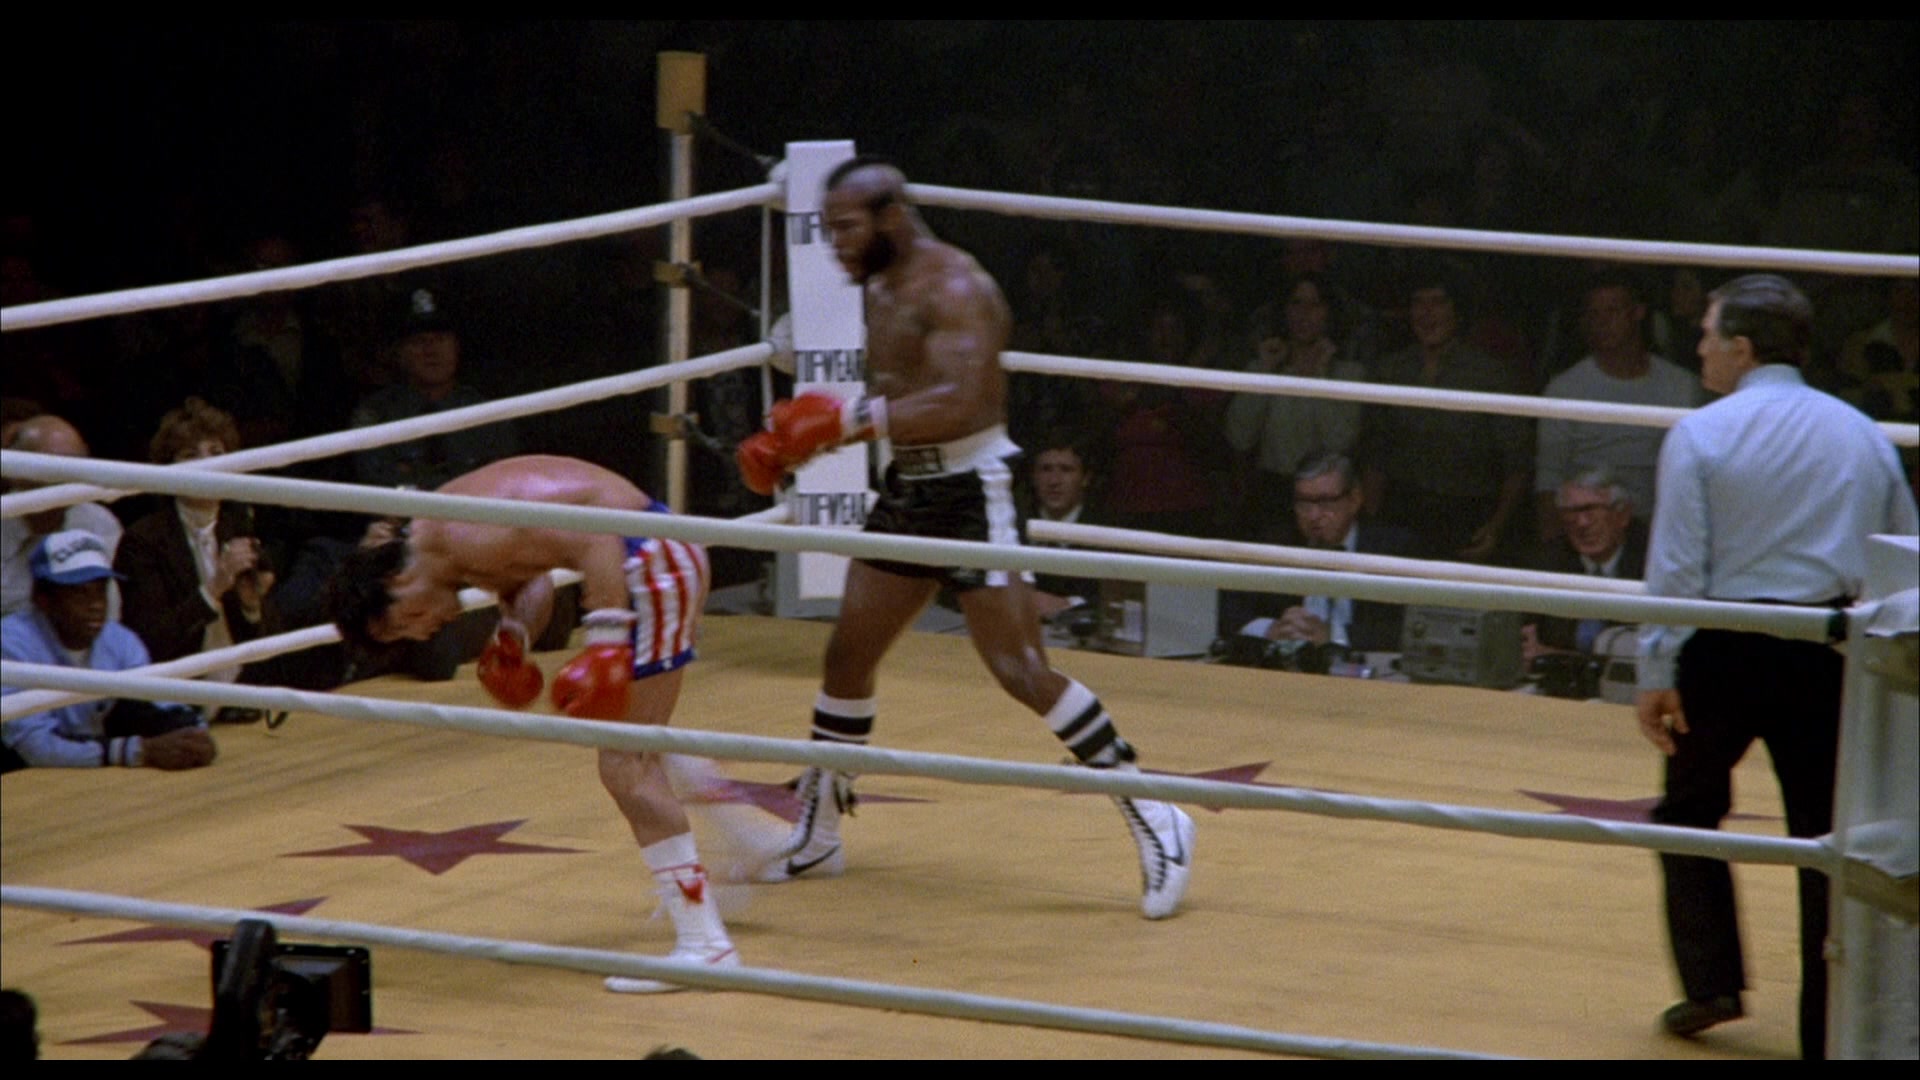 Nike Boxing Shoes Worn by Mr. T (Clubber Lang) in Rocky 3 (1982) Movie